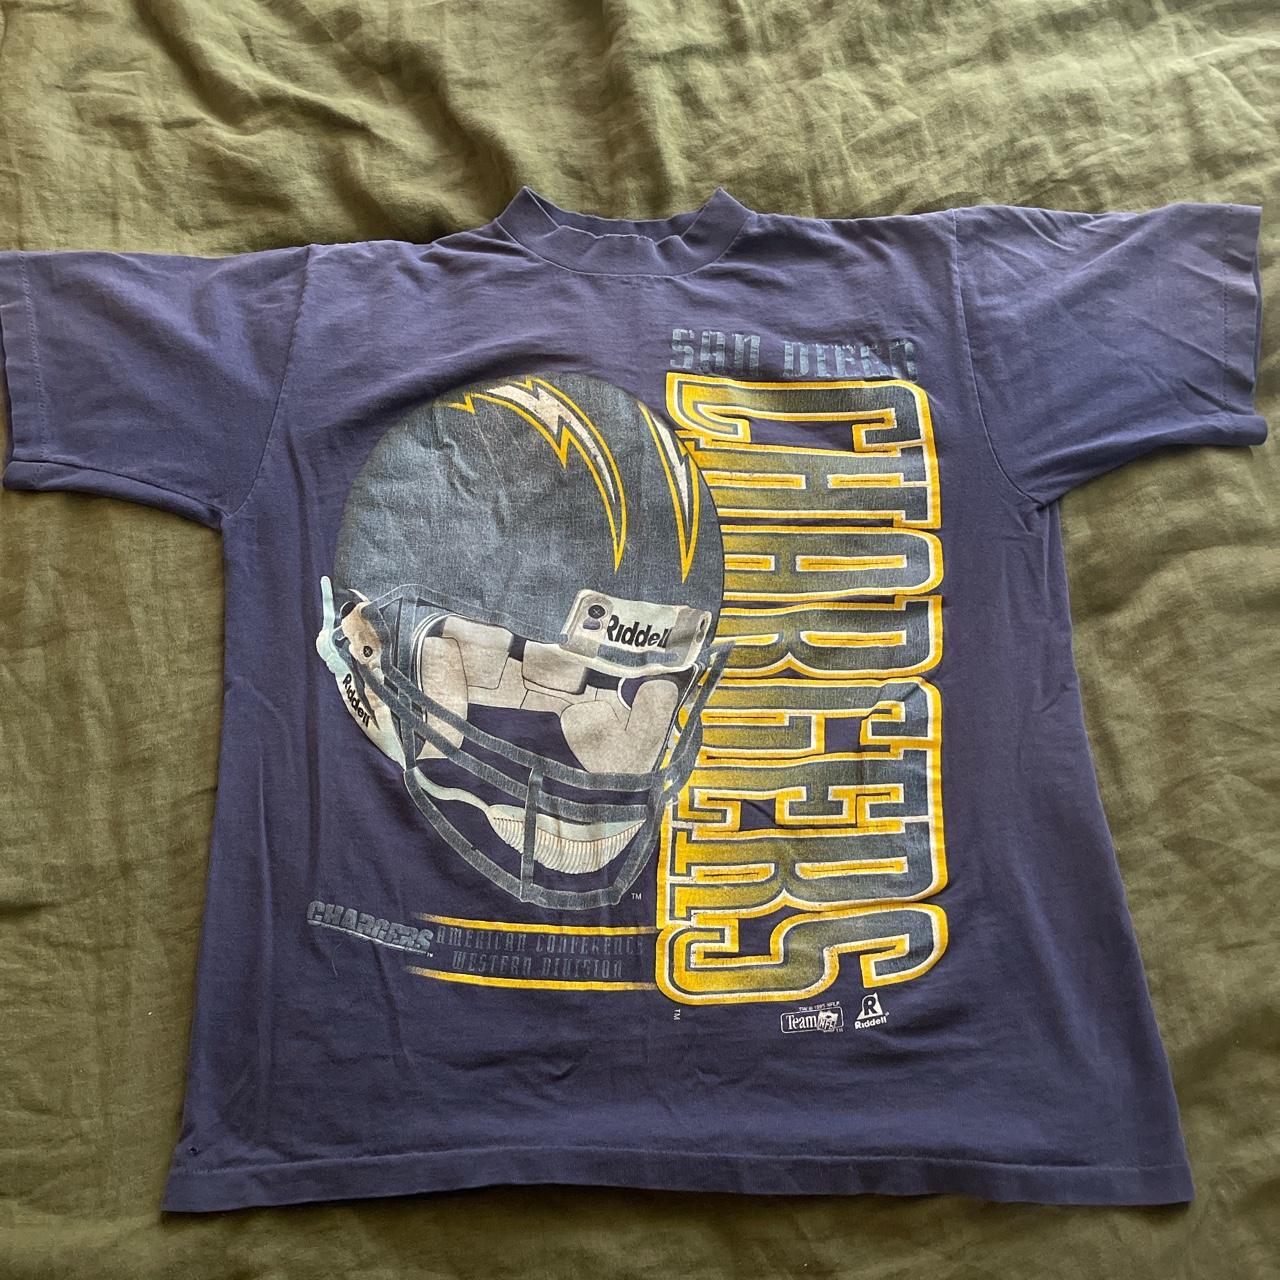 Vintage 90’s Russell San Diego Chargers NFL tshirt